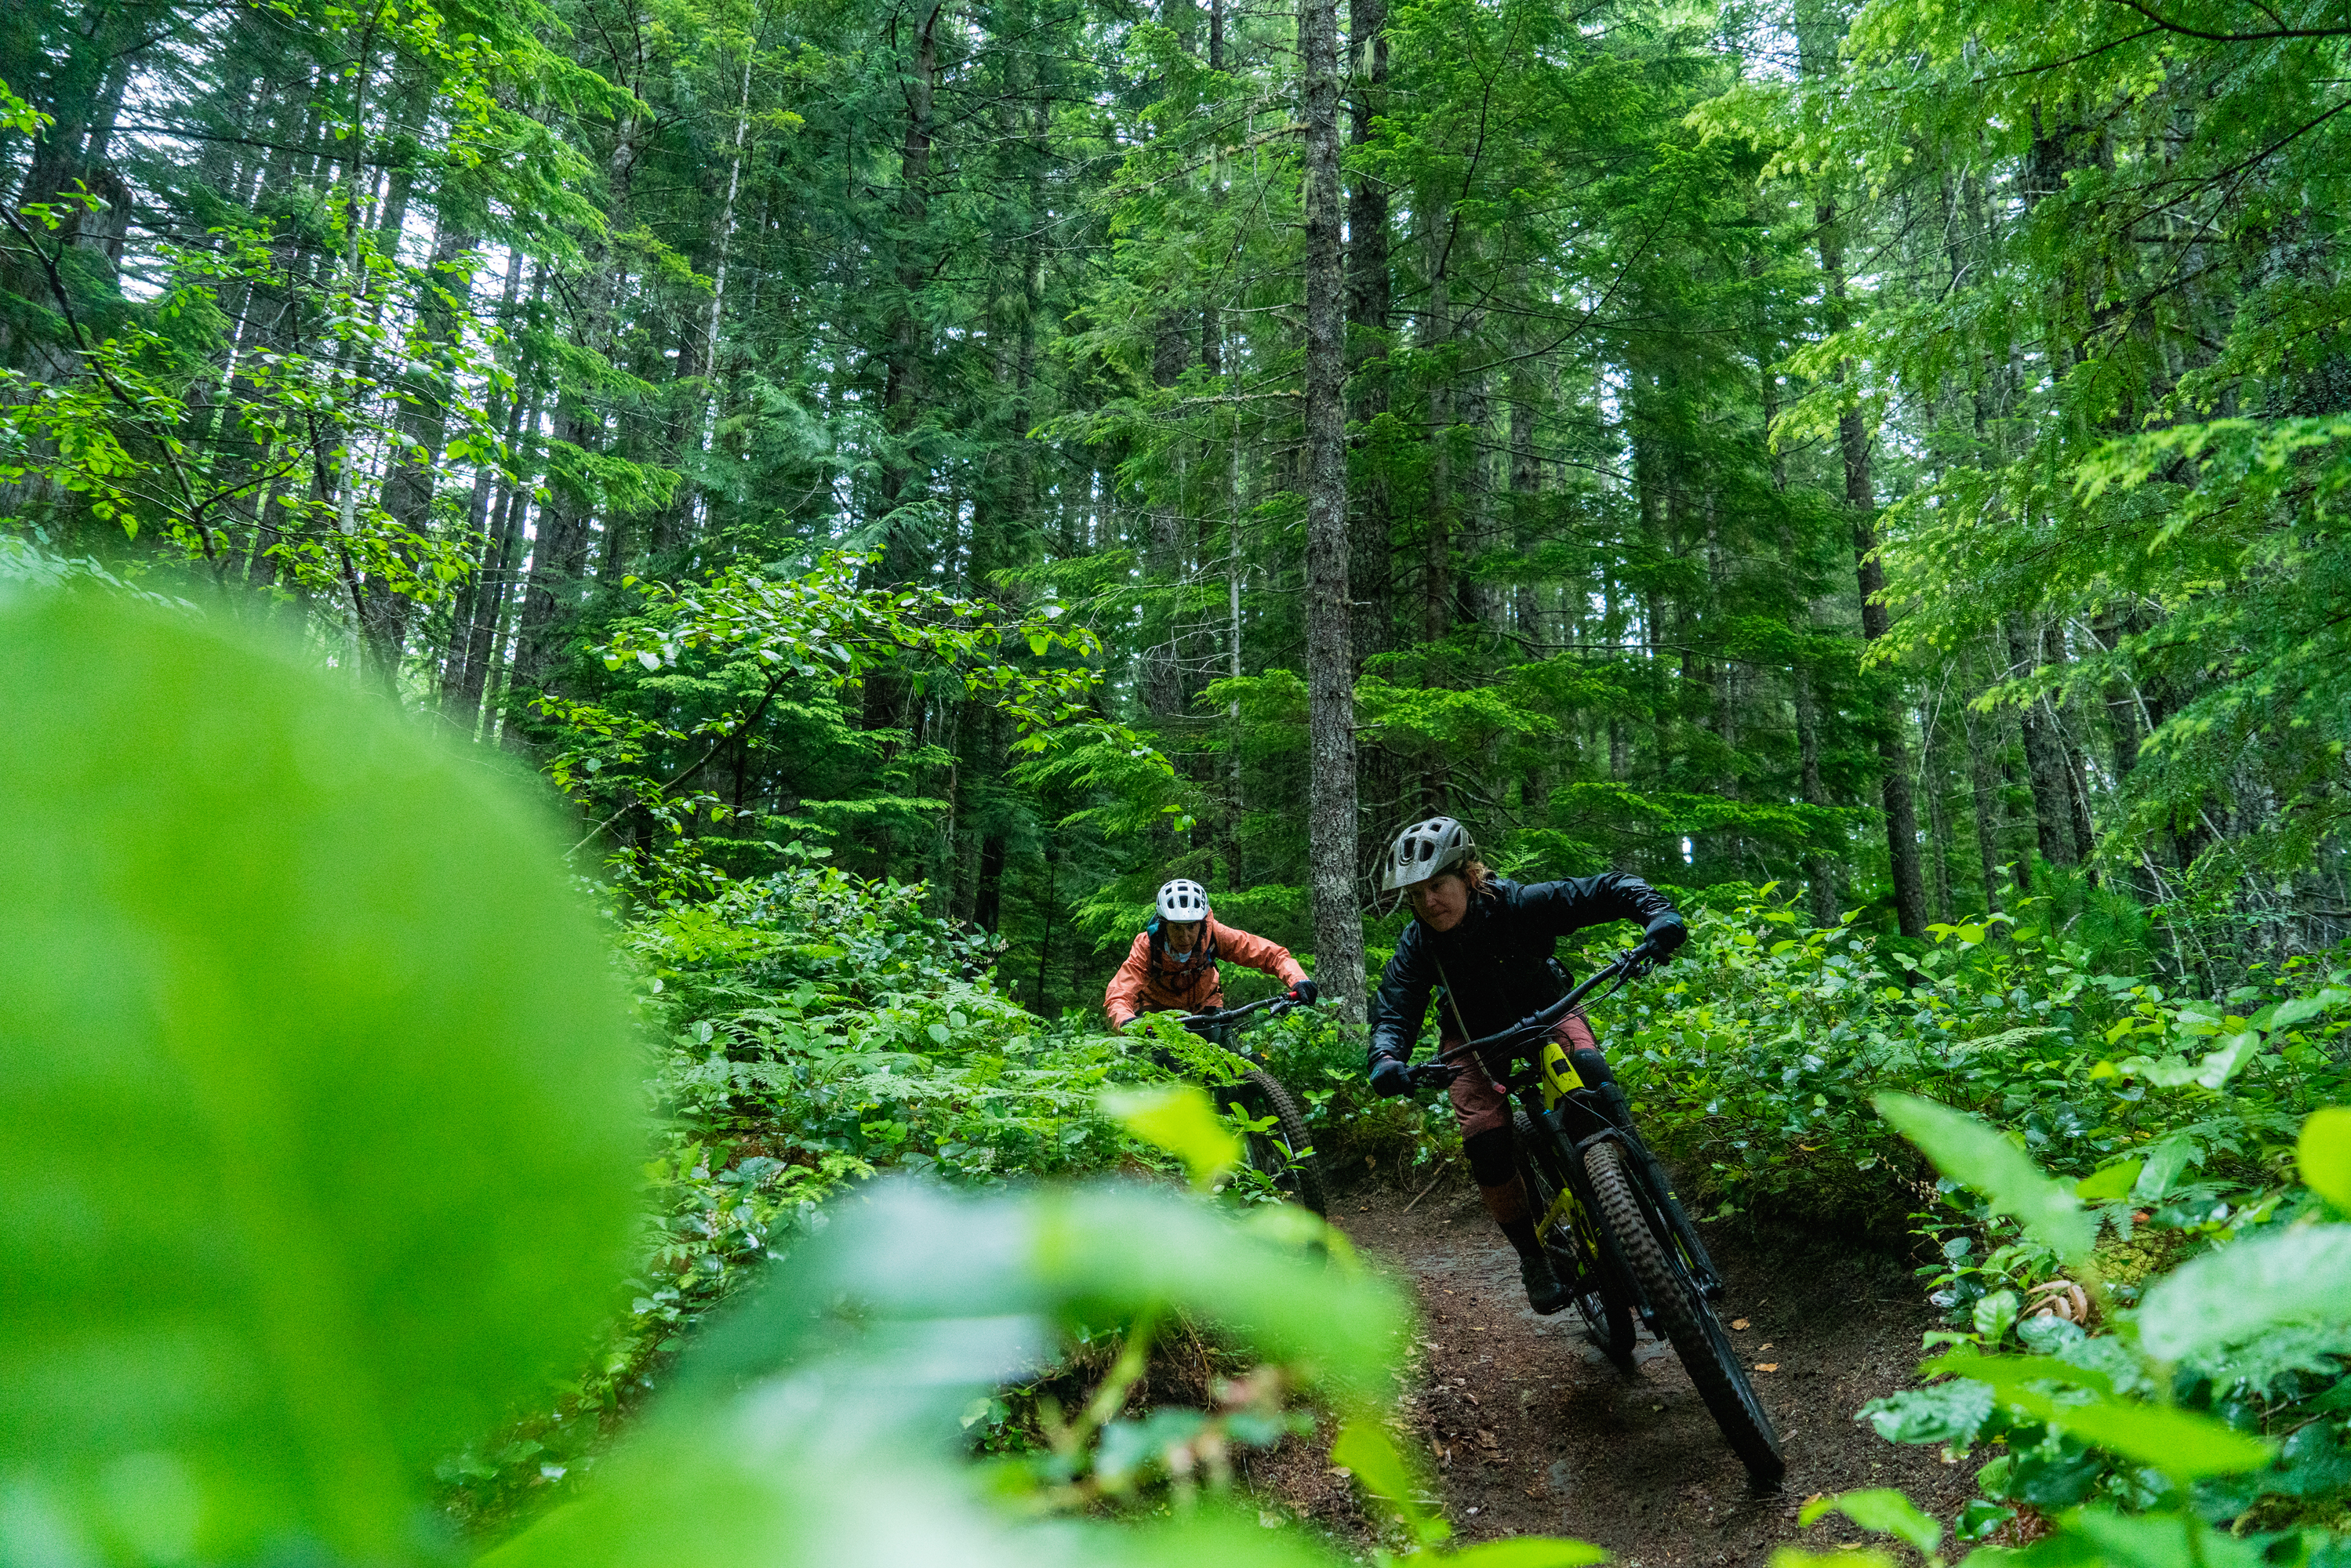 riding emtb's through the pacific north west